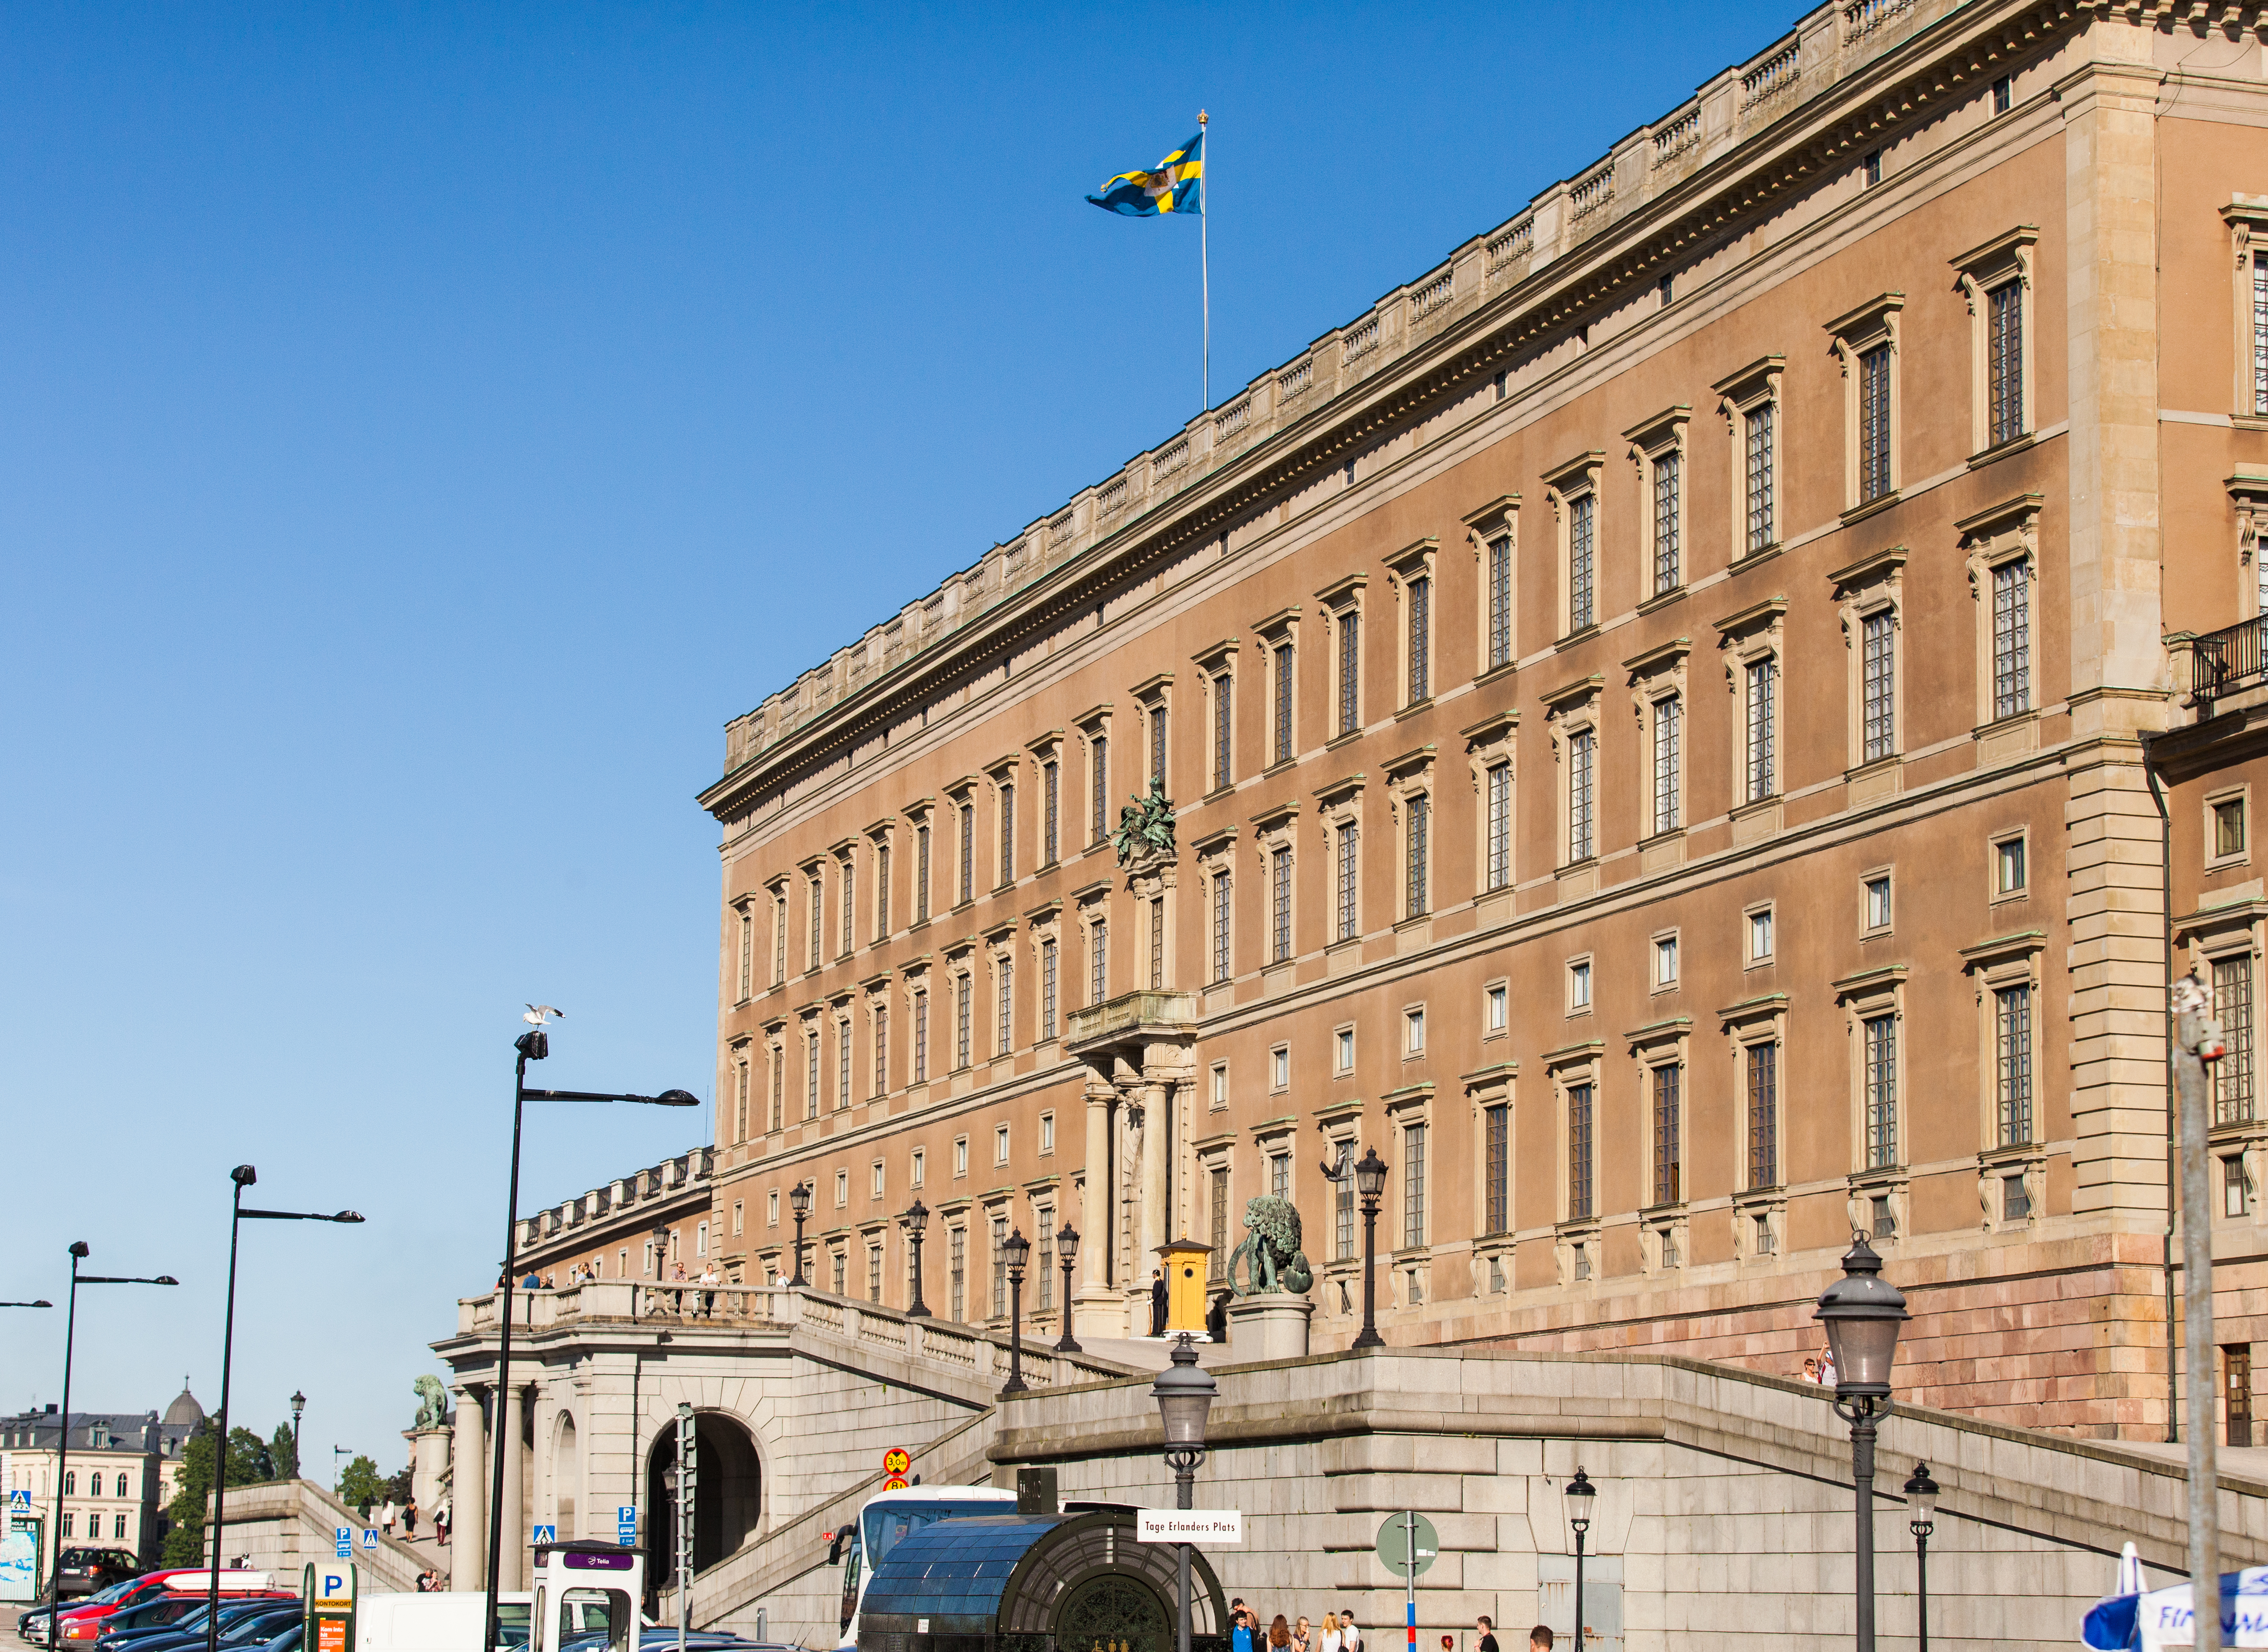 the royal palace in Stockholm city, Sweden, June 2014, picture 20